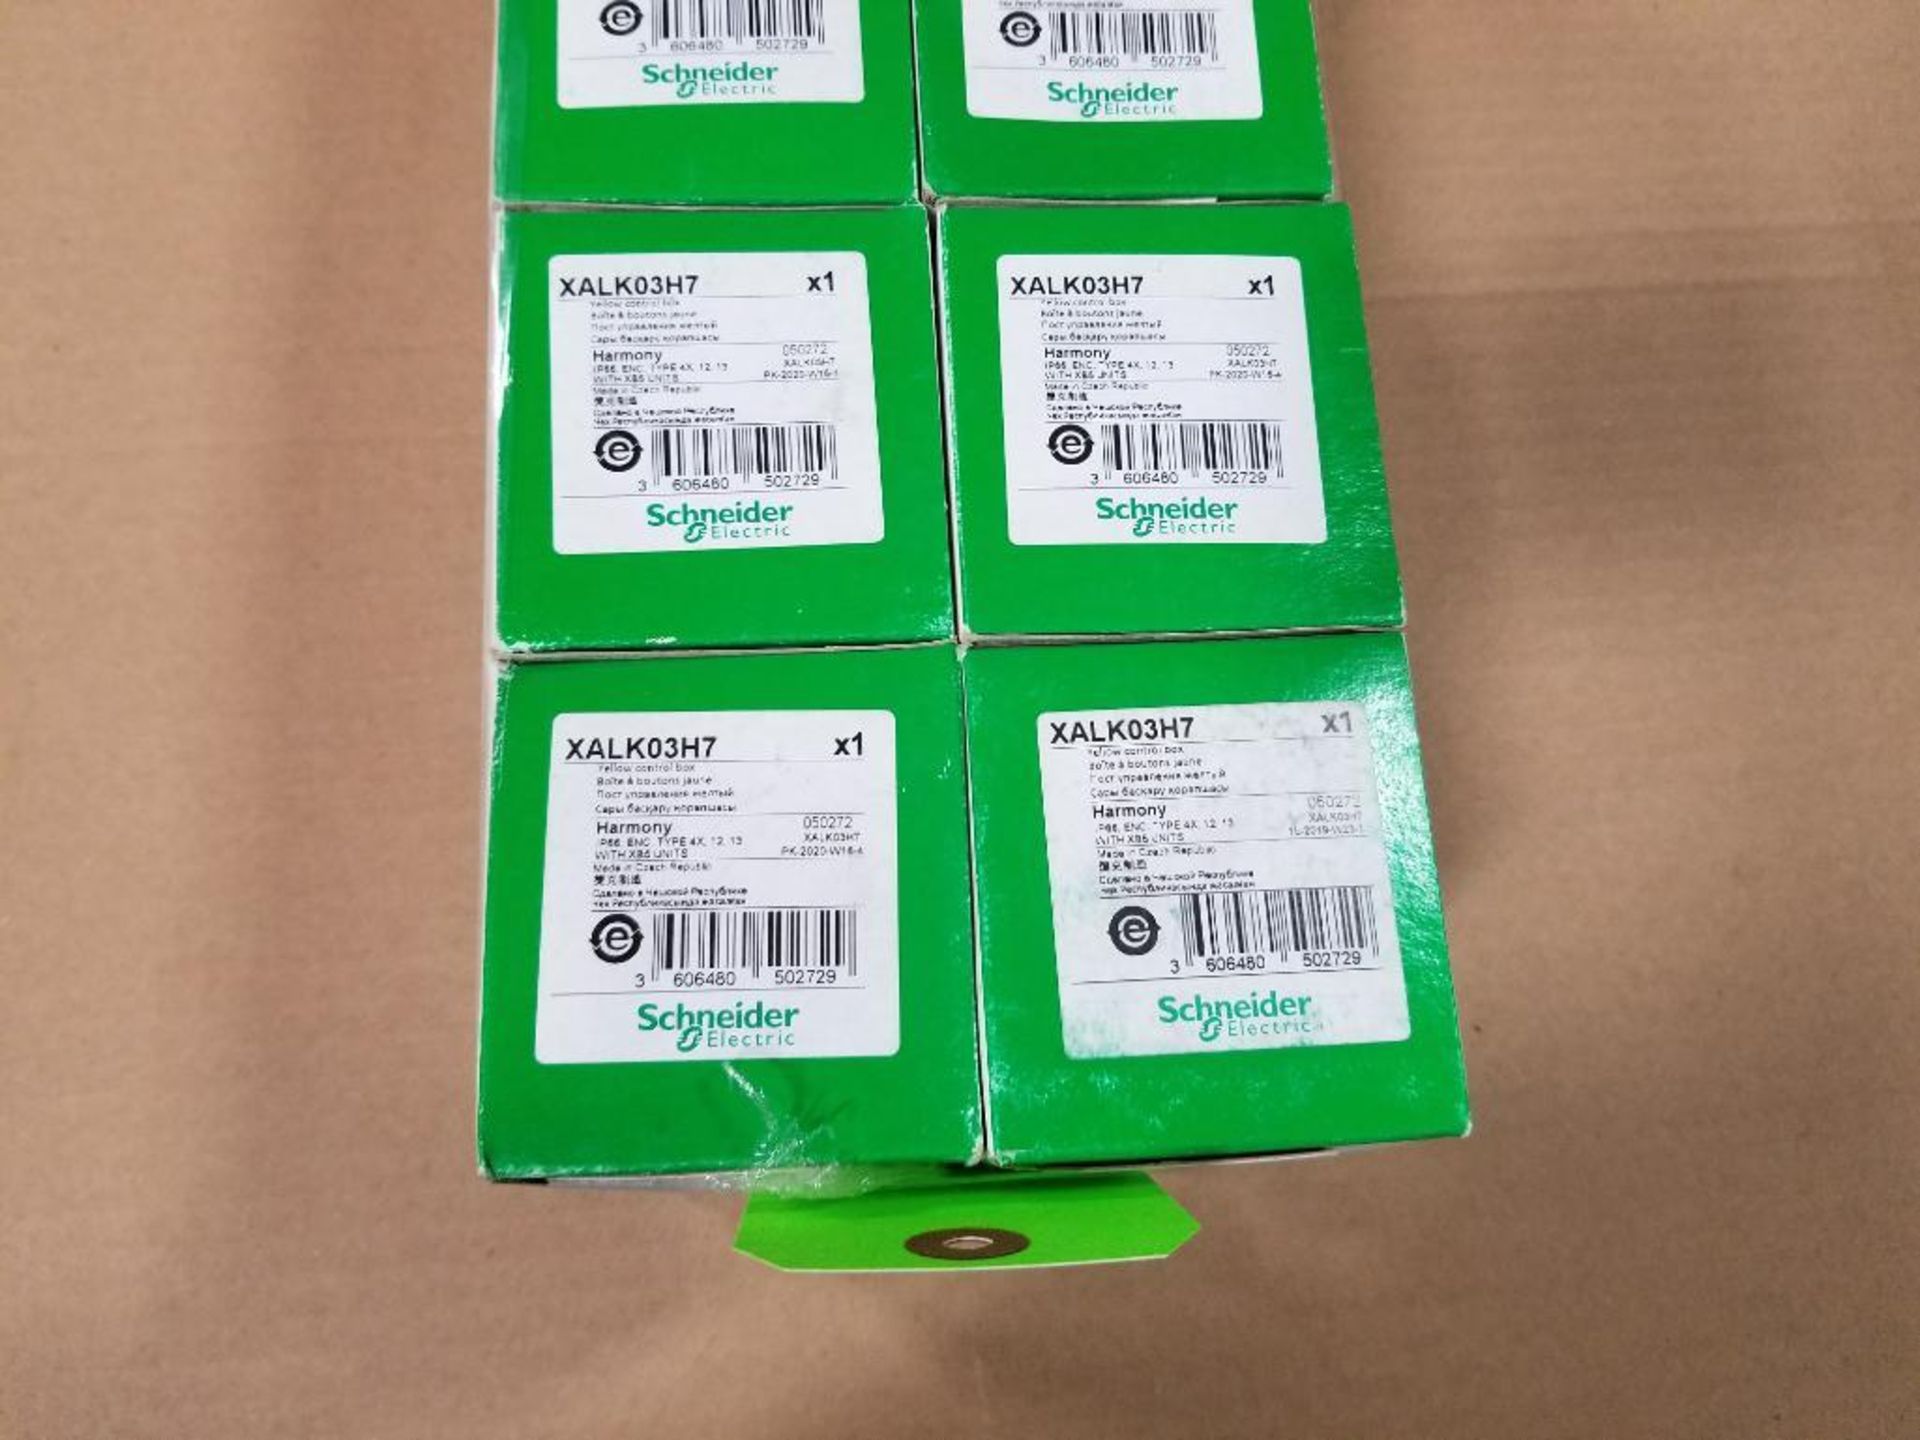 Qty 10 - Schneider Electric XALK03H7 3-unit pushbutton enclosure. New in box. - Image 6 of 8